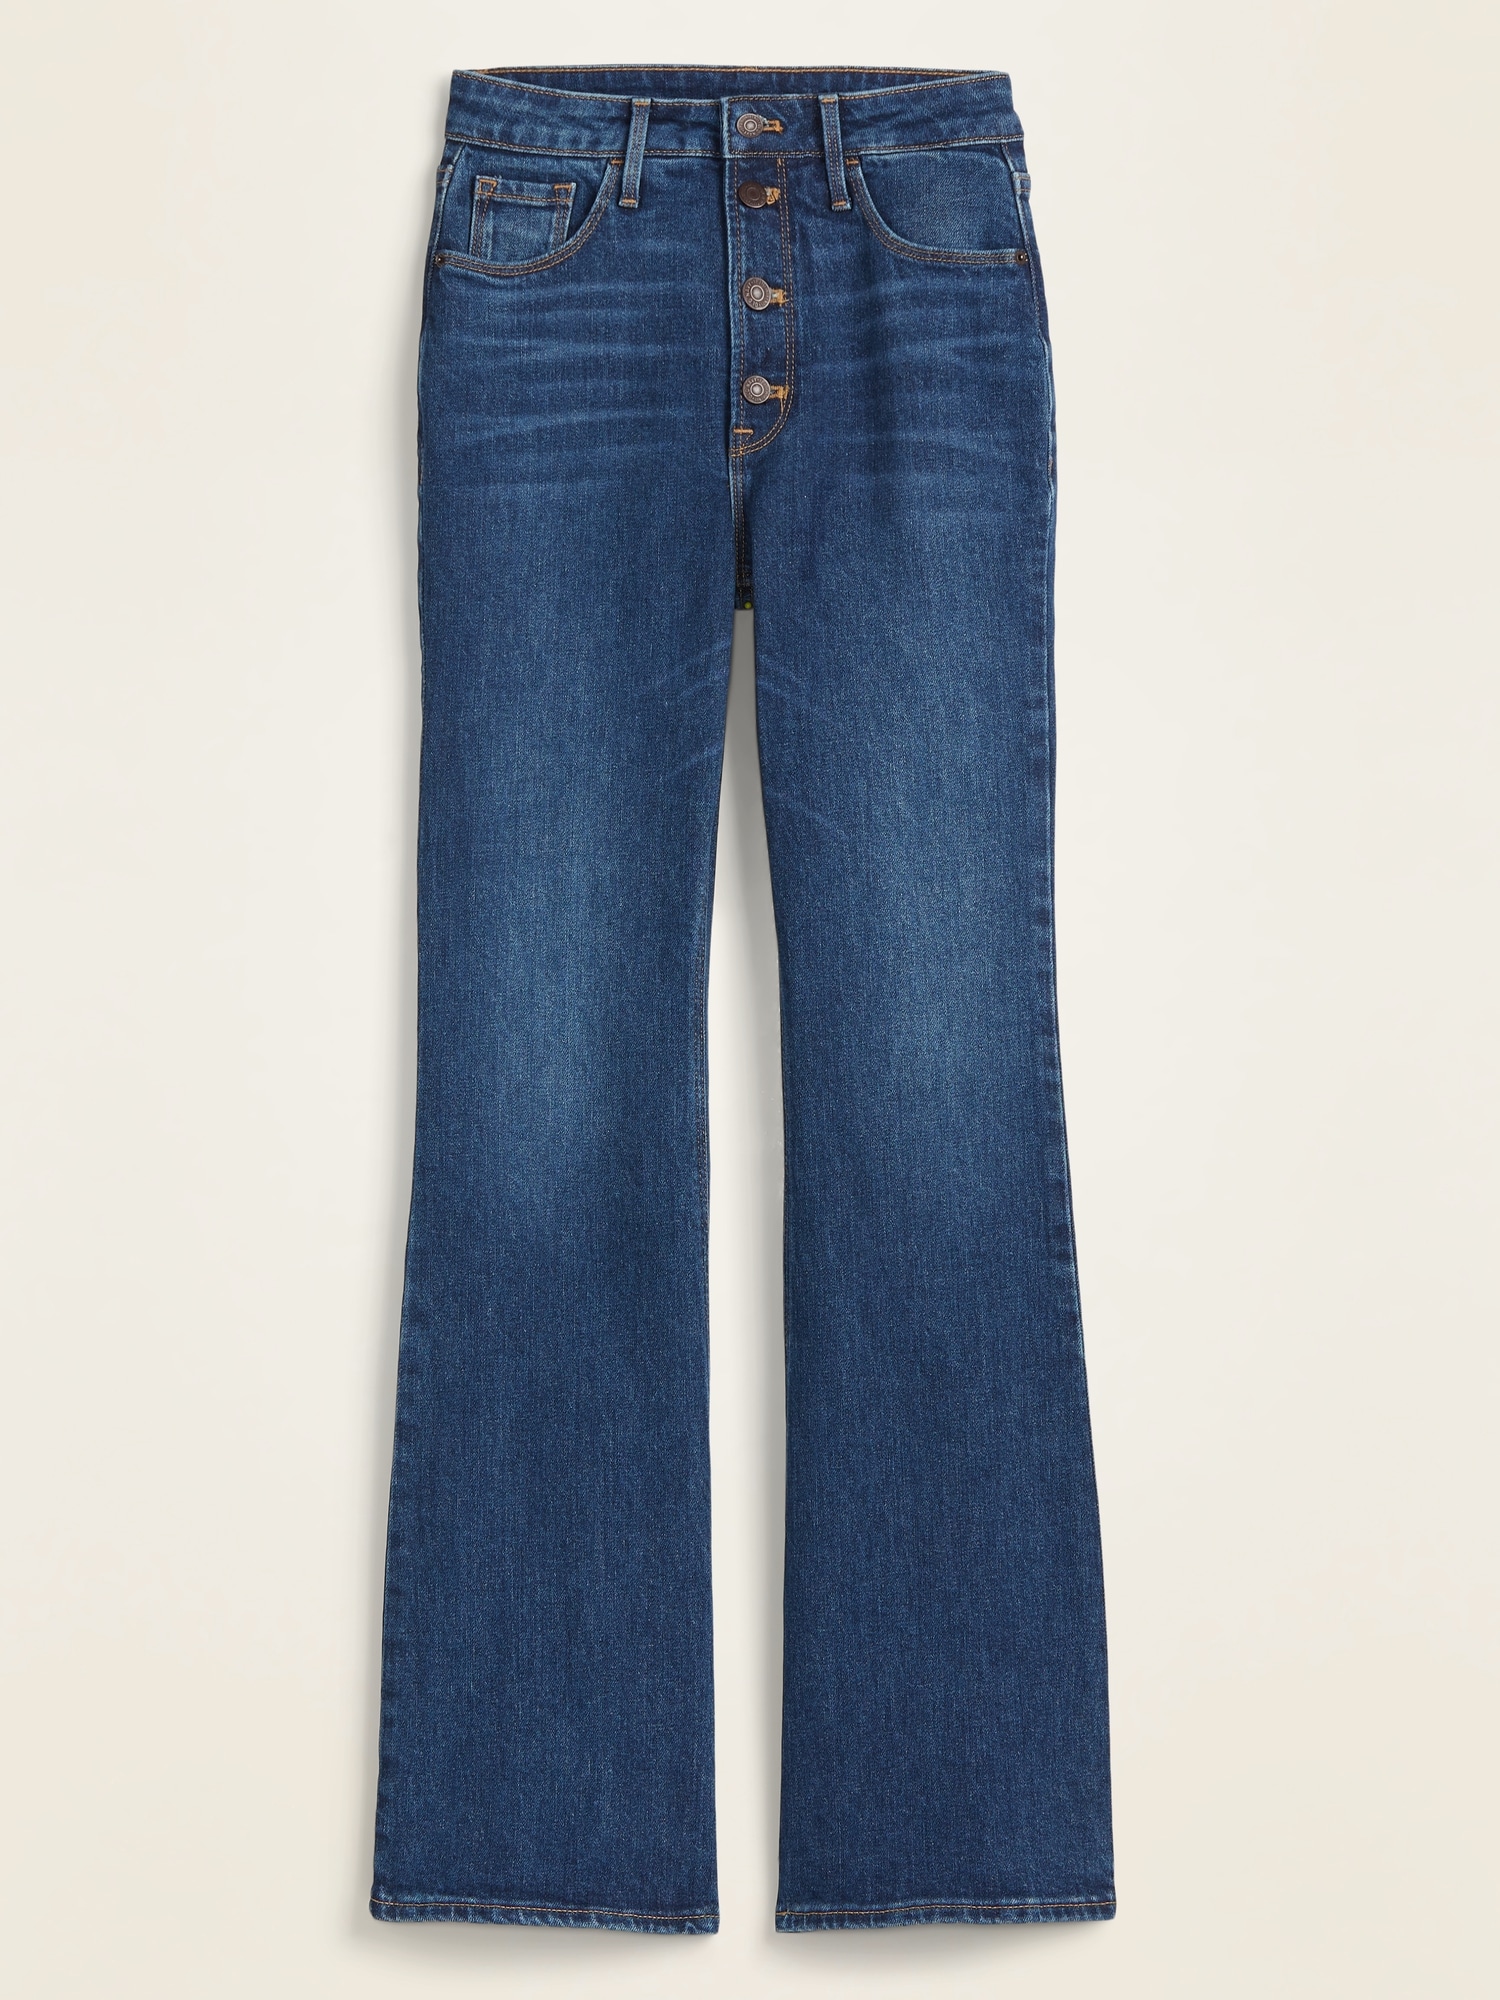 women's exposed button fly jeans